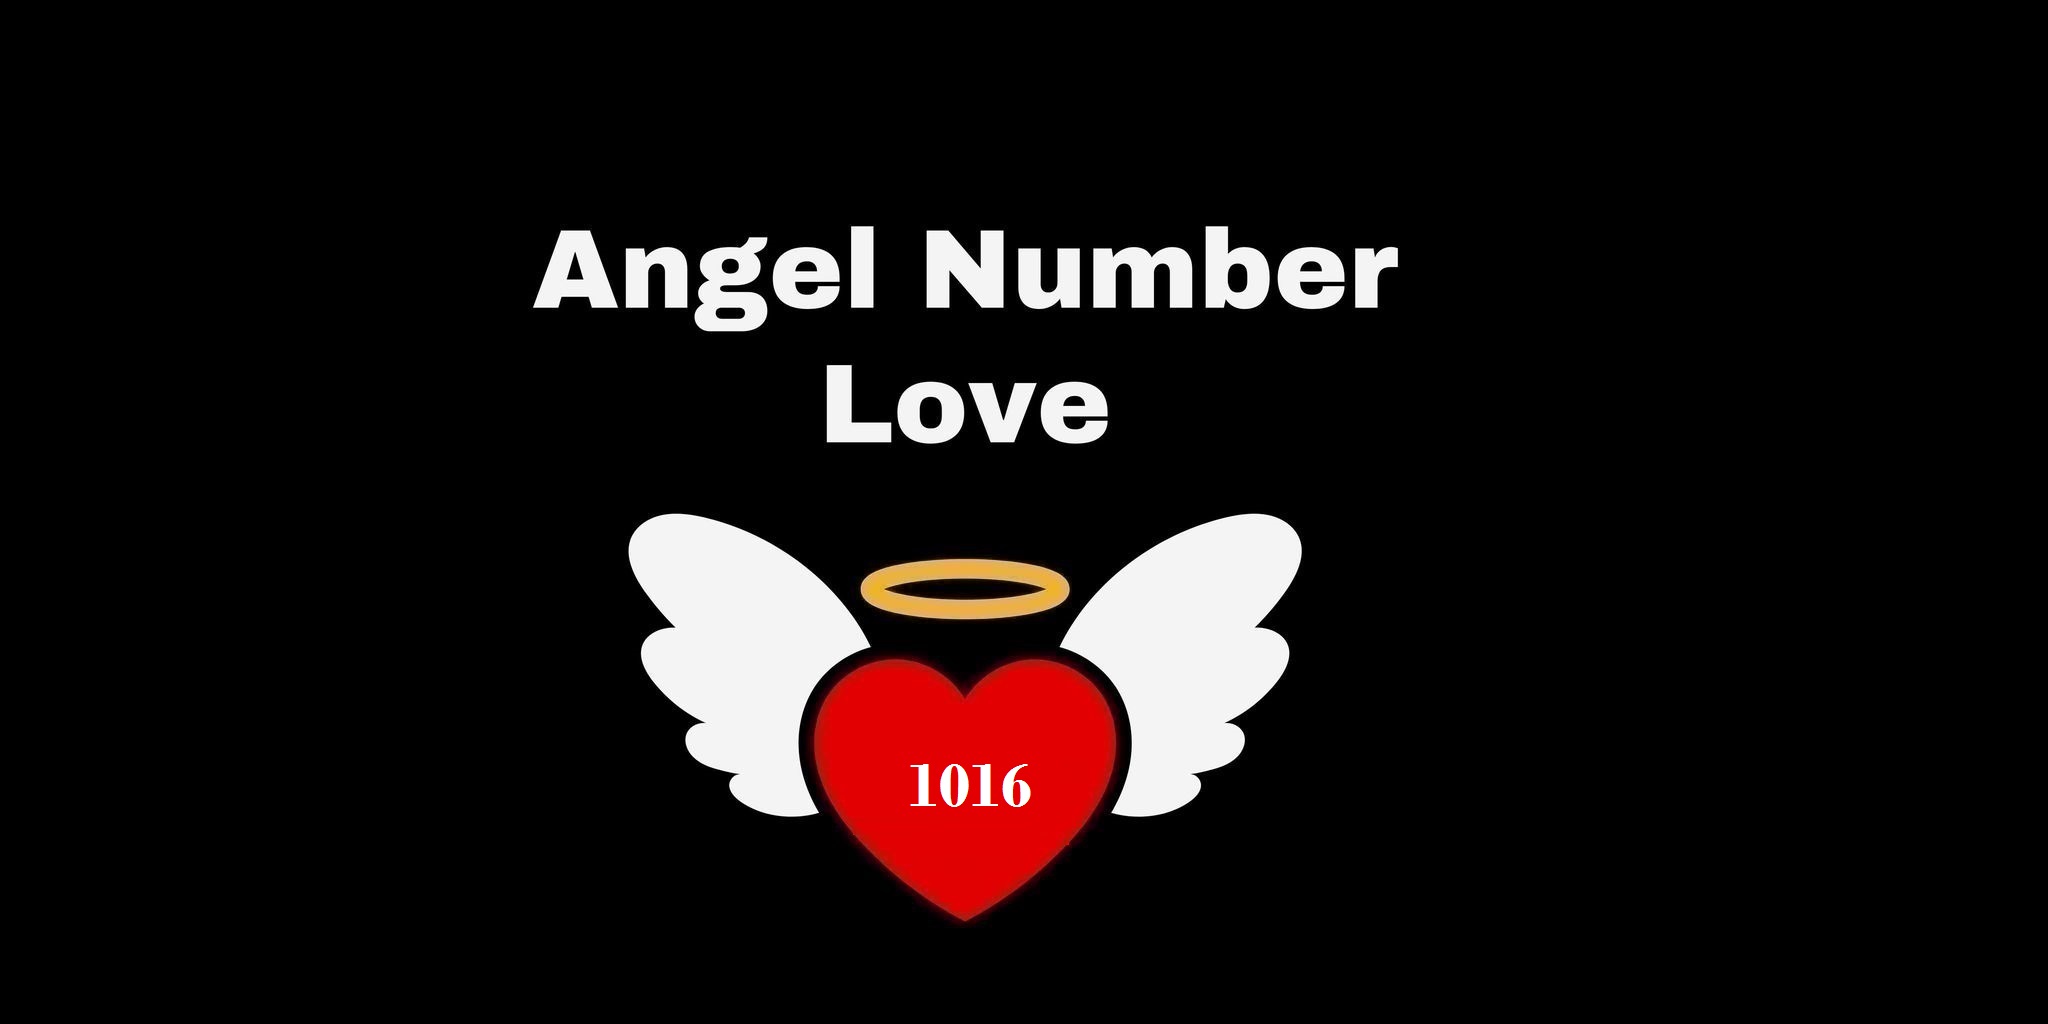 1016 Angel Number Meaning In Love